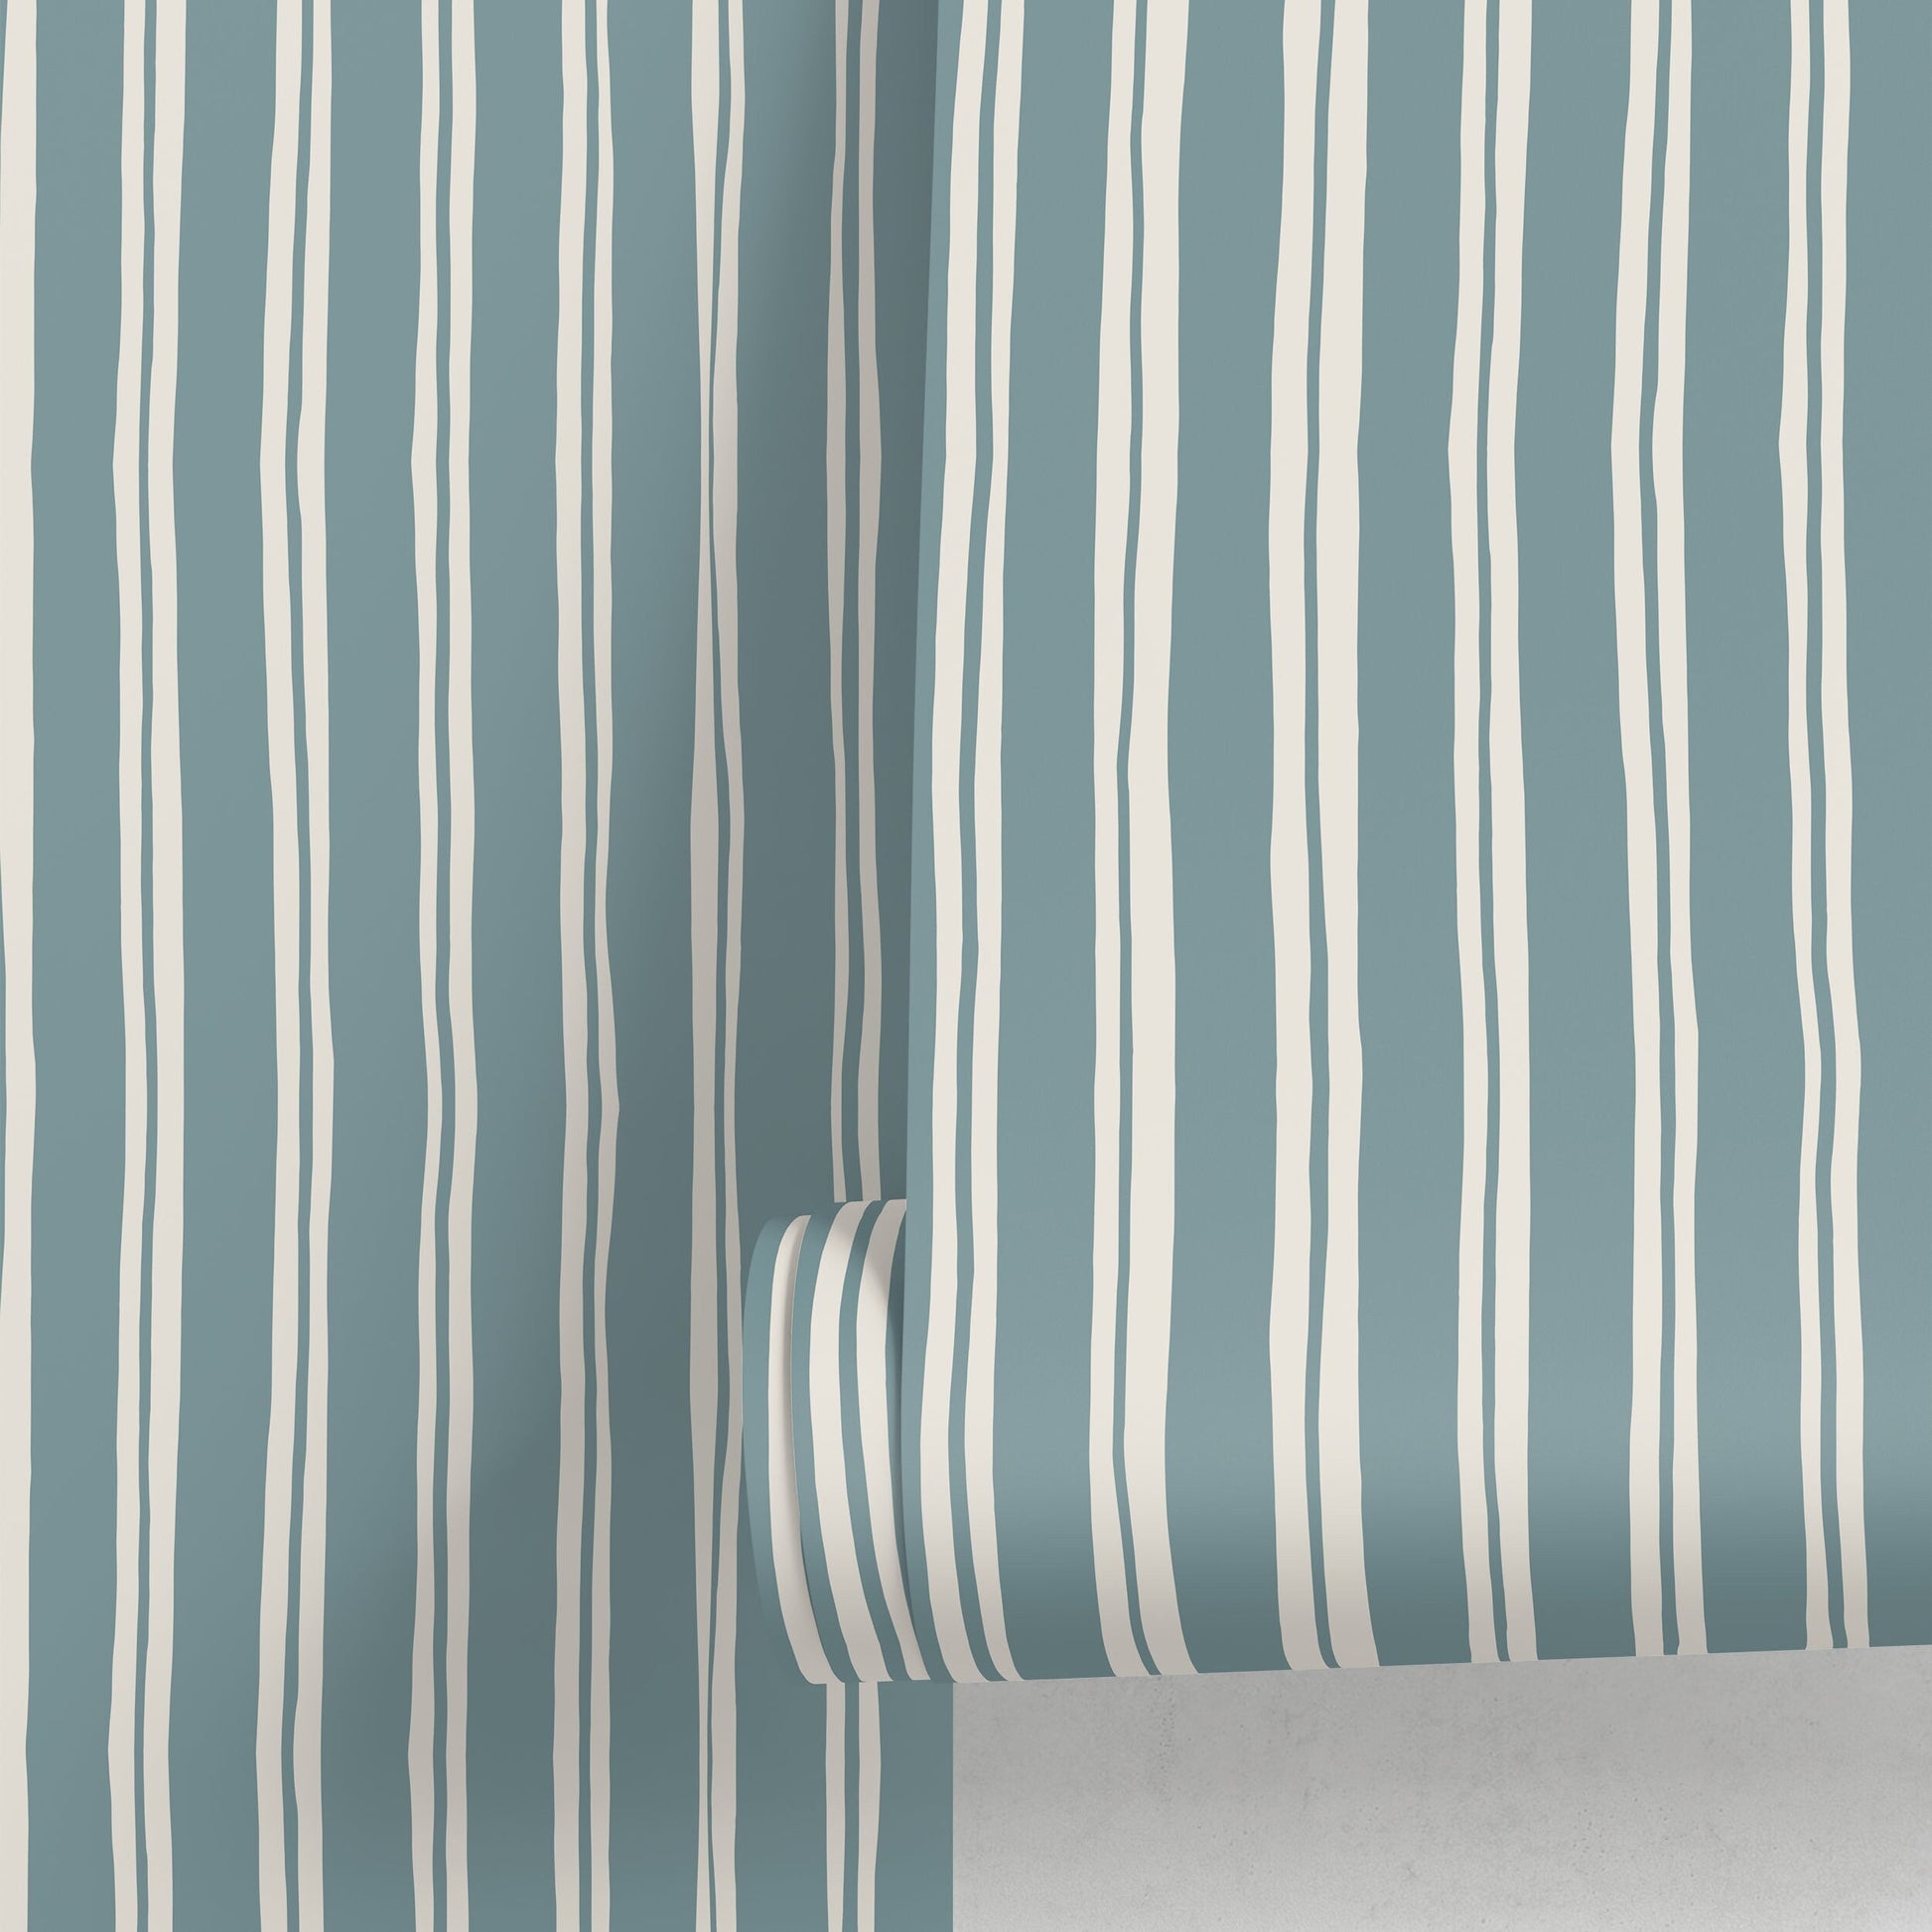 Light Blue Lines Wallpaper Boho Striped Wallpaper Peel and Stick and Traditional Wallpaper - D765